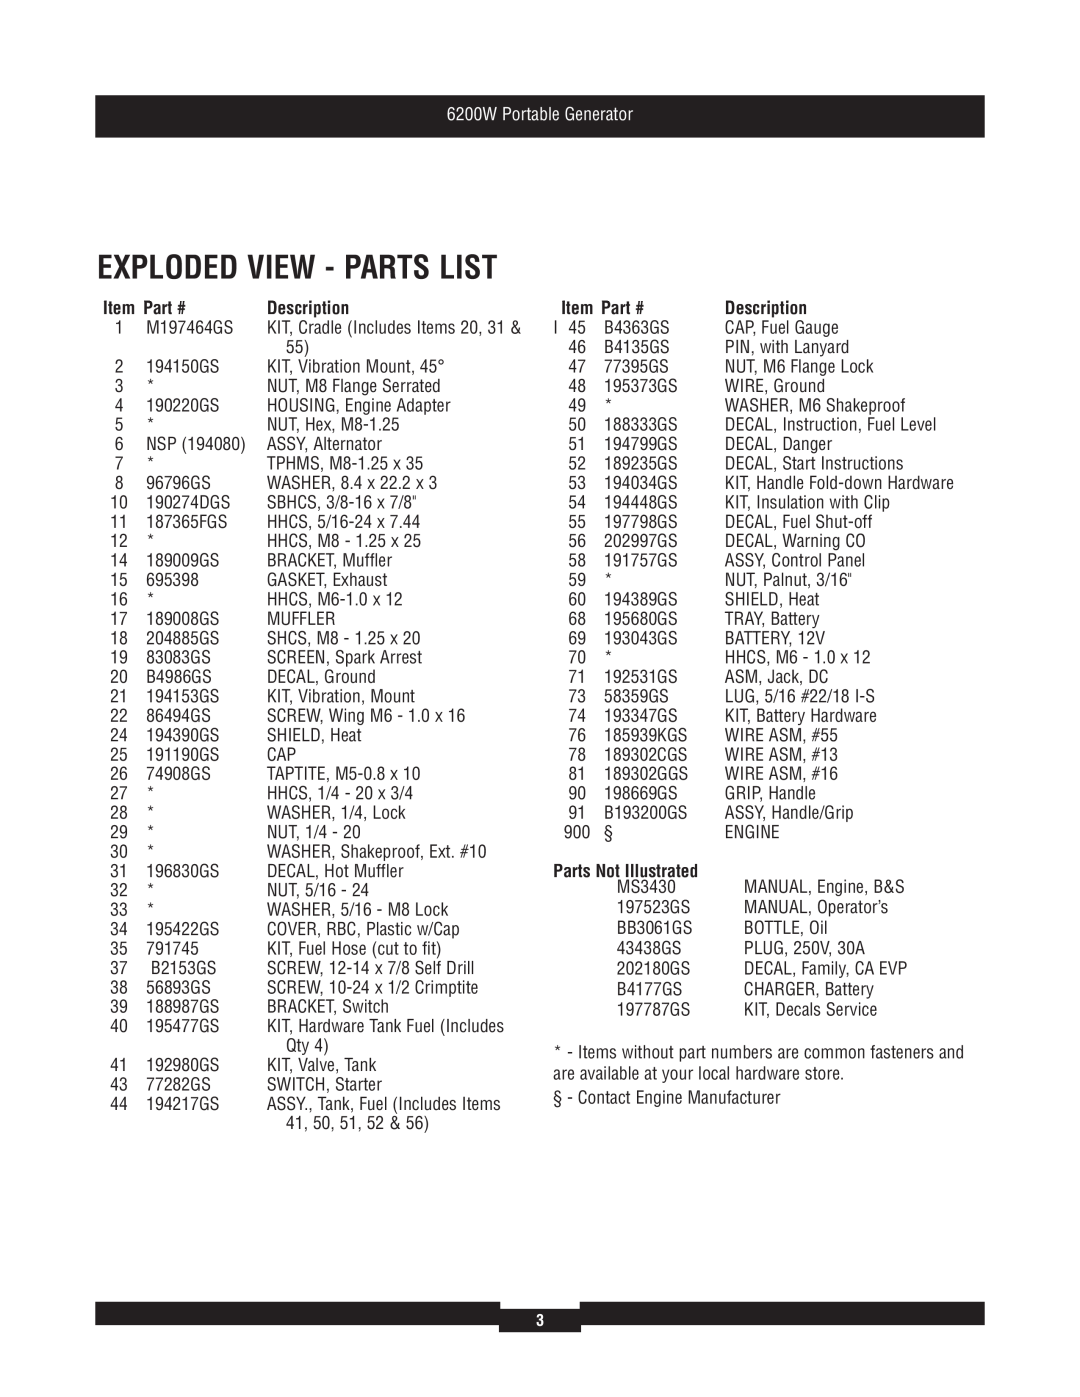 Briggs & Stratton 30386 manual Exploded View - Parts List, Description, Parts Not Illustrated, 6200W Portable Generator 